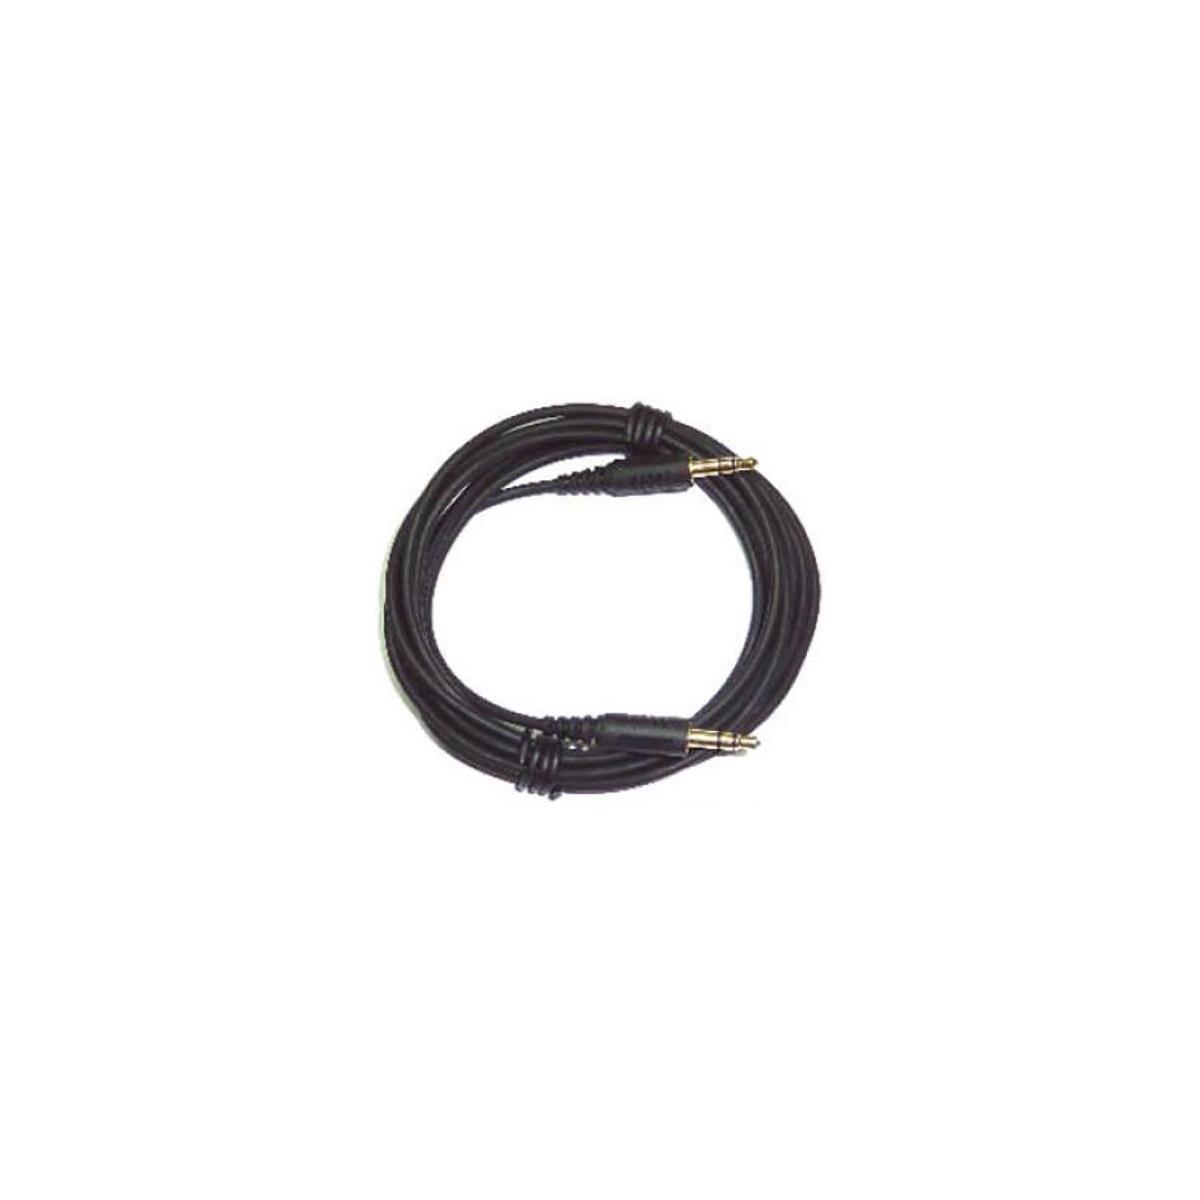 Sennheiser Spare Part: RS160, RS170, RS 180. Replacement Audio cable f/wireless -  534486